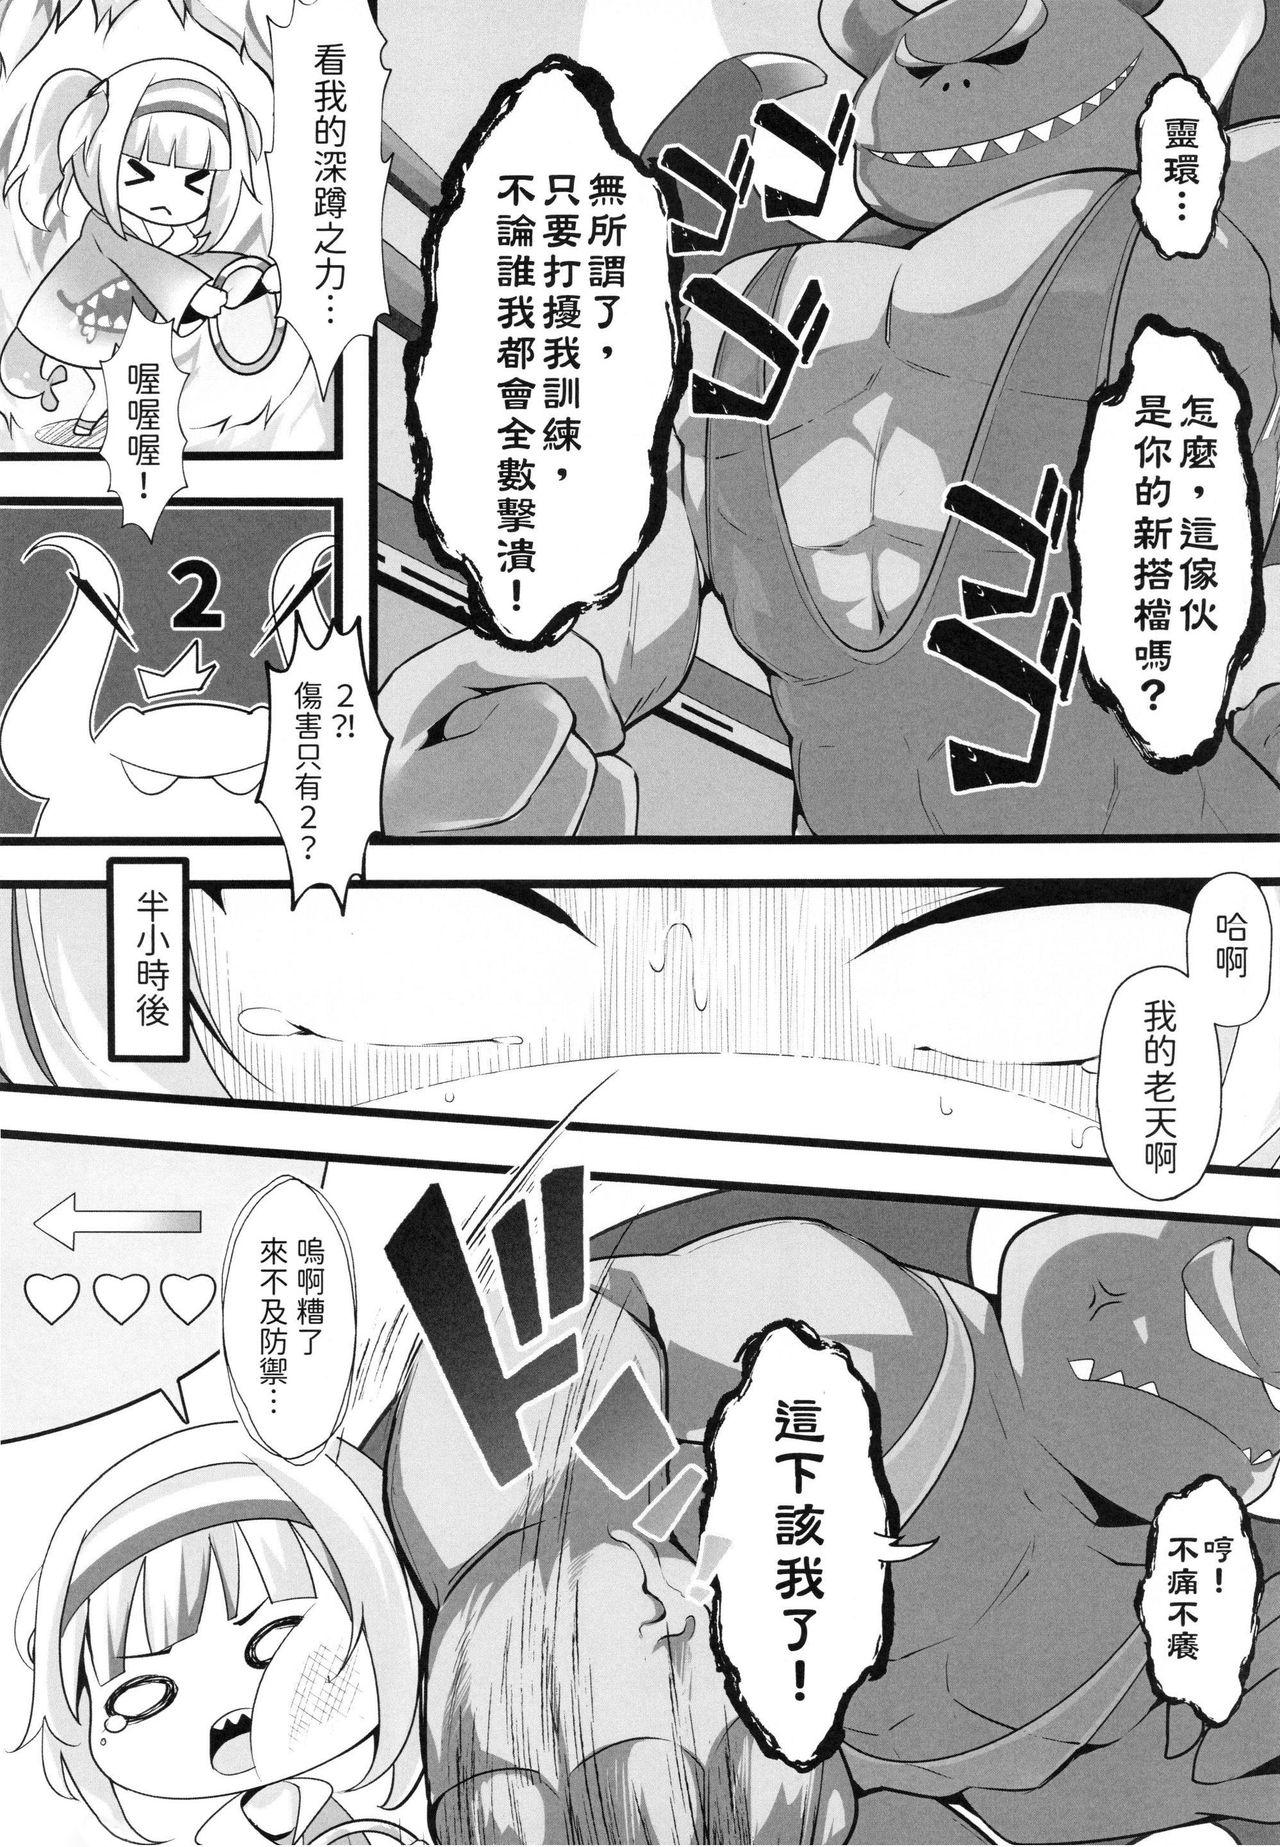 Tiny 【台灣FF37】[ちやみ] Let's Sweat (hololive) (Gawr Gura) (Vtuber) [Chinese] [Decensored] - Hololive Ring fit adventure Mulata - Page 5